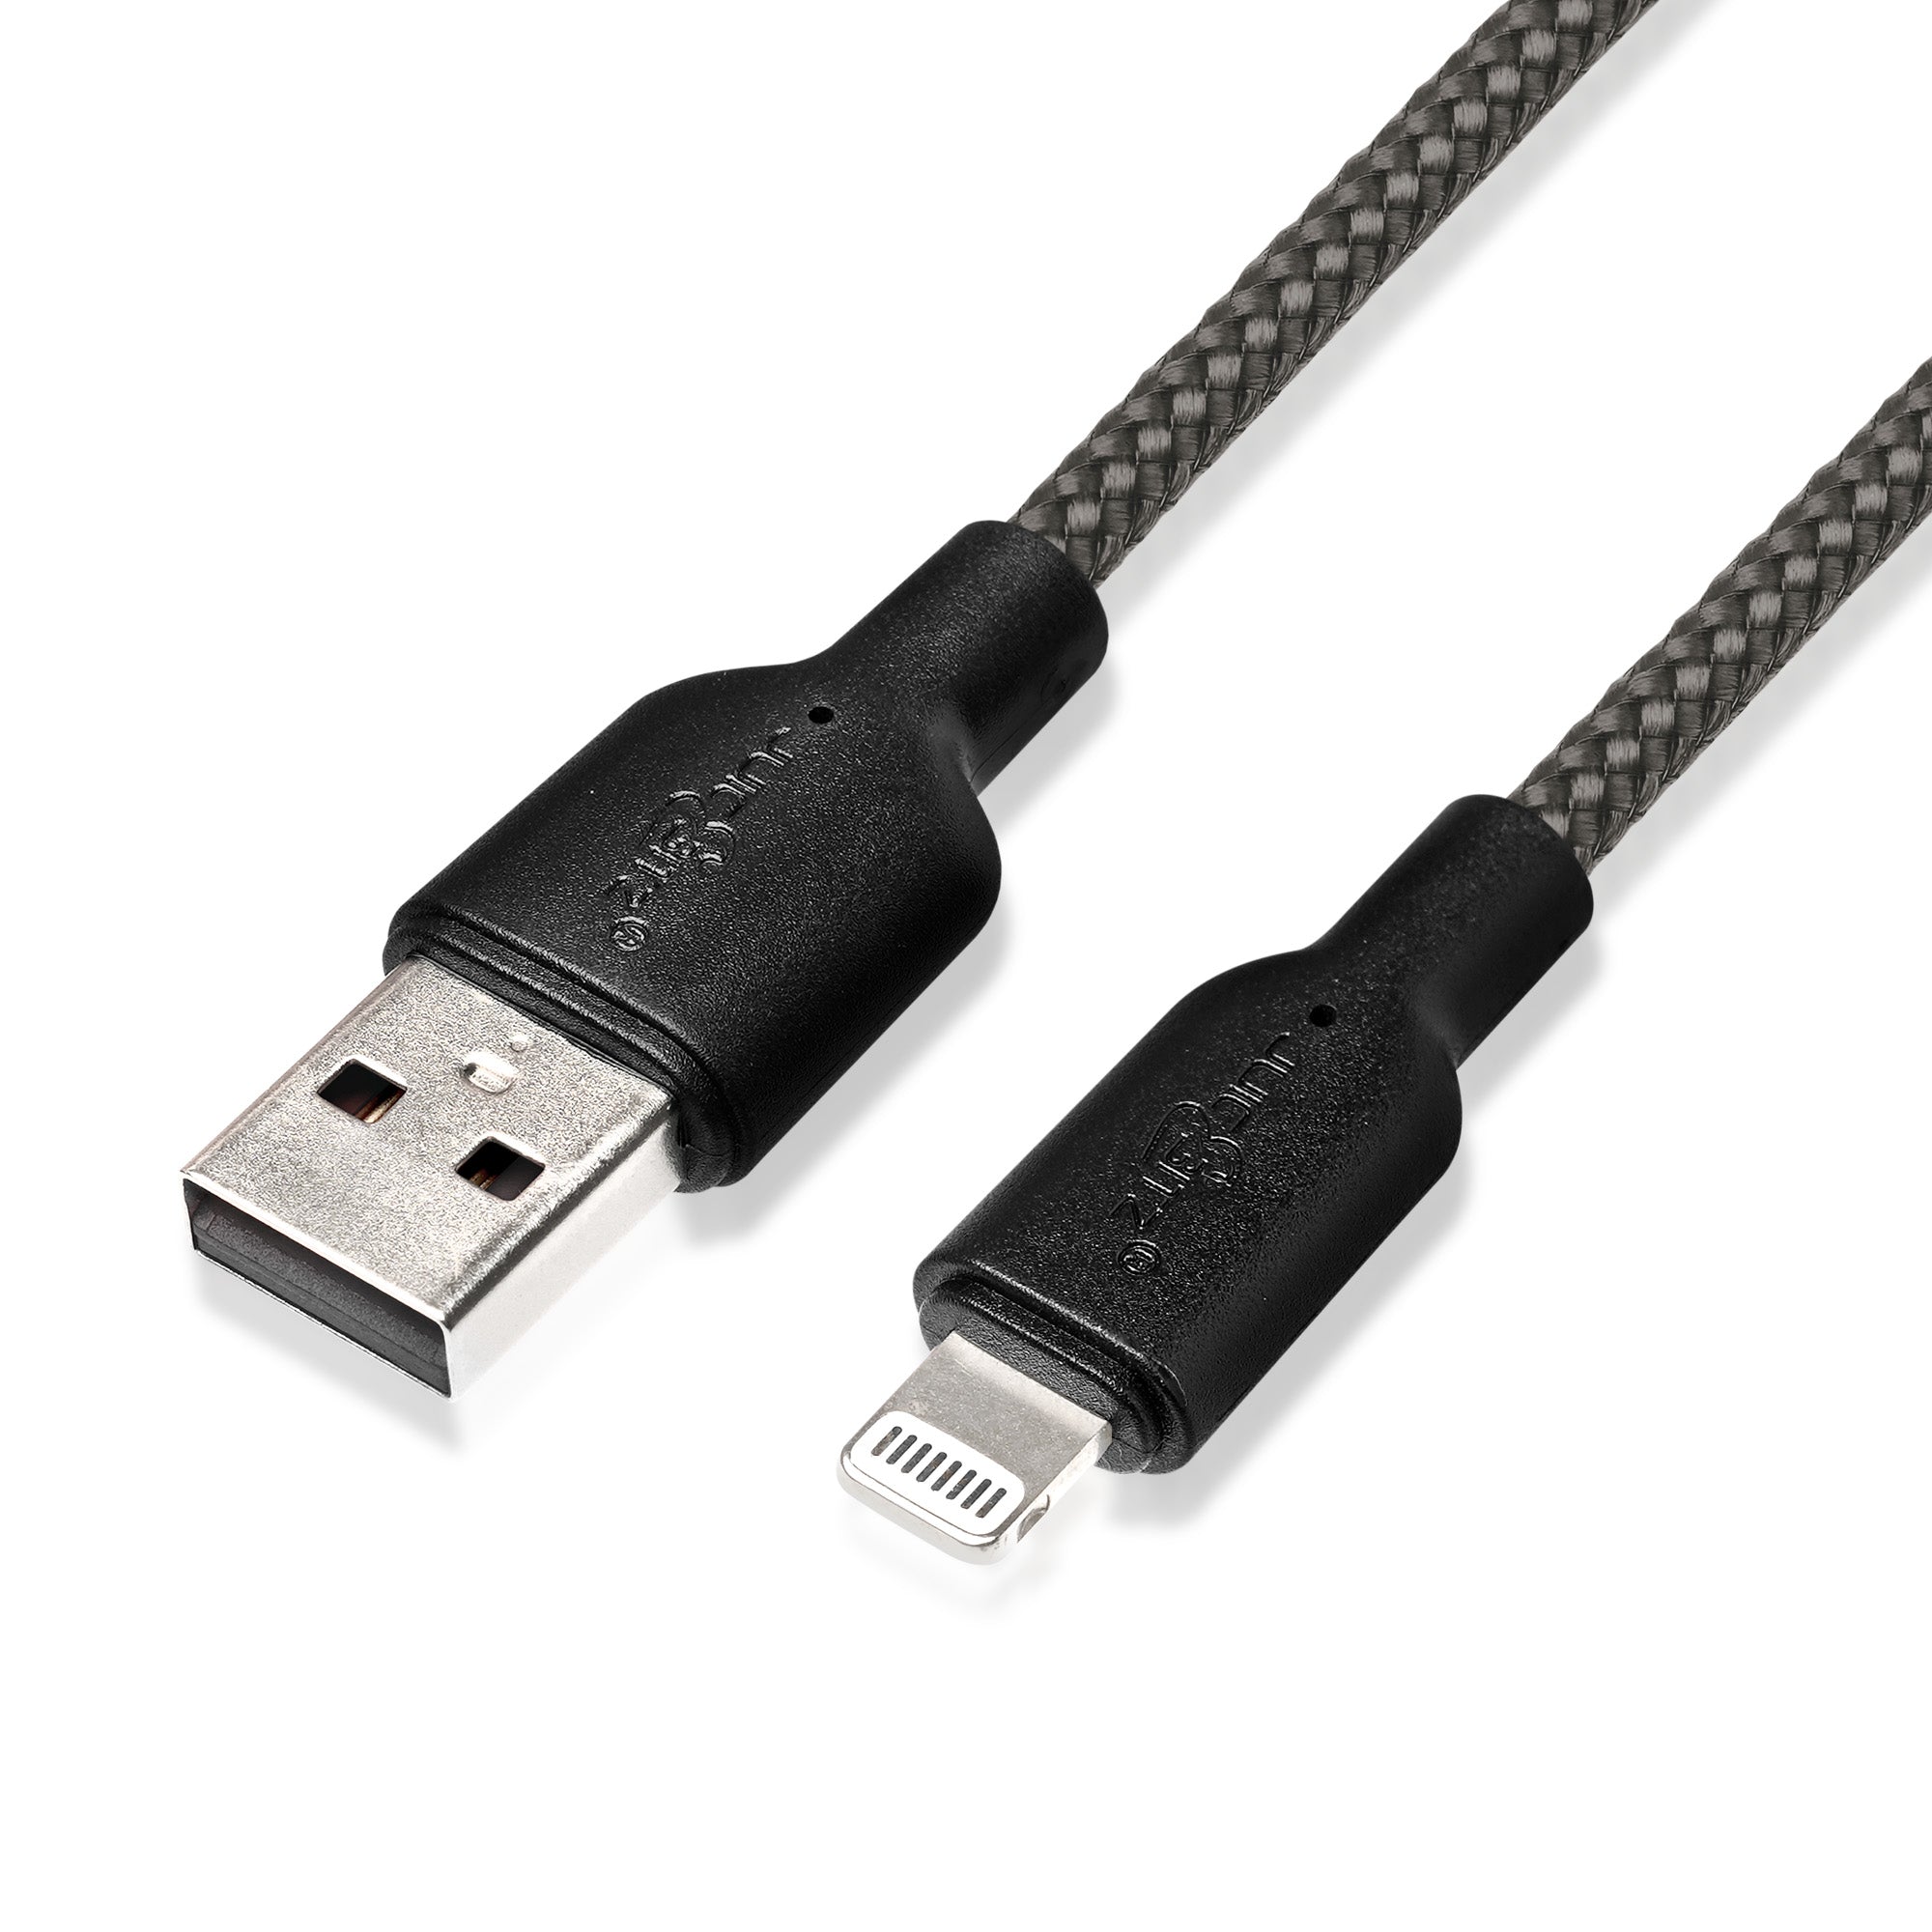 Braided Heavy Duty USB Charger Cable Data Sync Wire Lead for iPhone, iPad, iPod - Grey